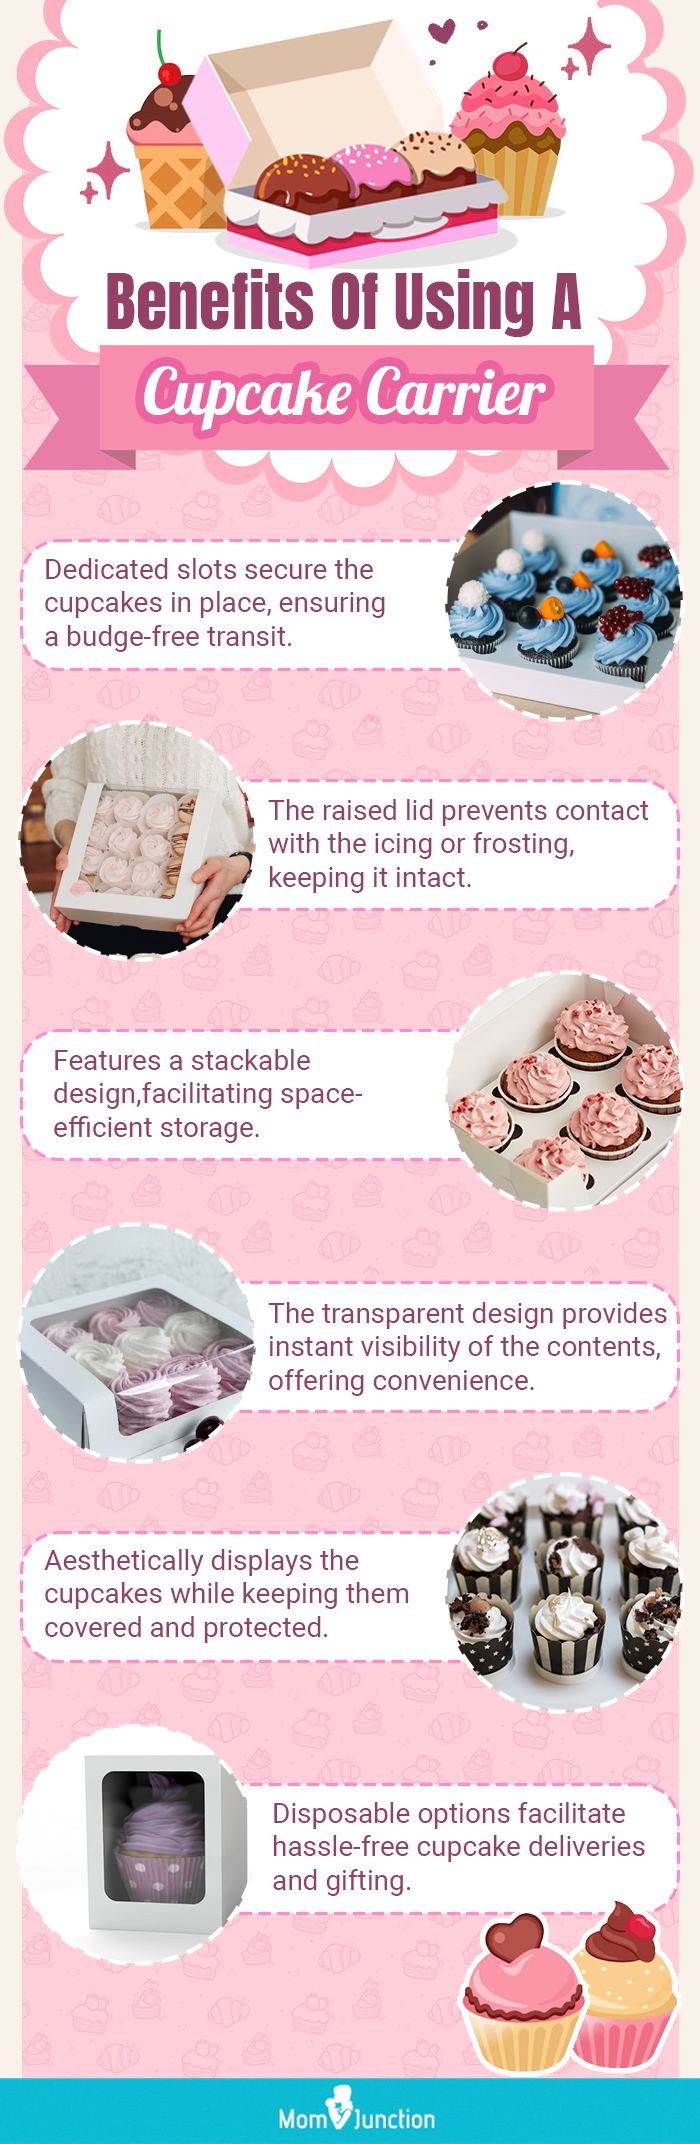 Benefits Of Using A Cupcake Carrier (infographic)